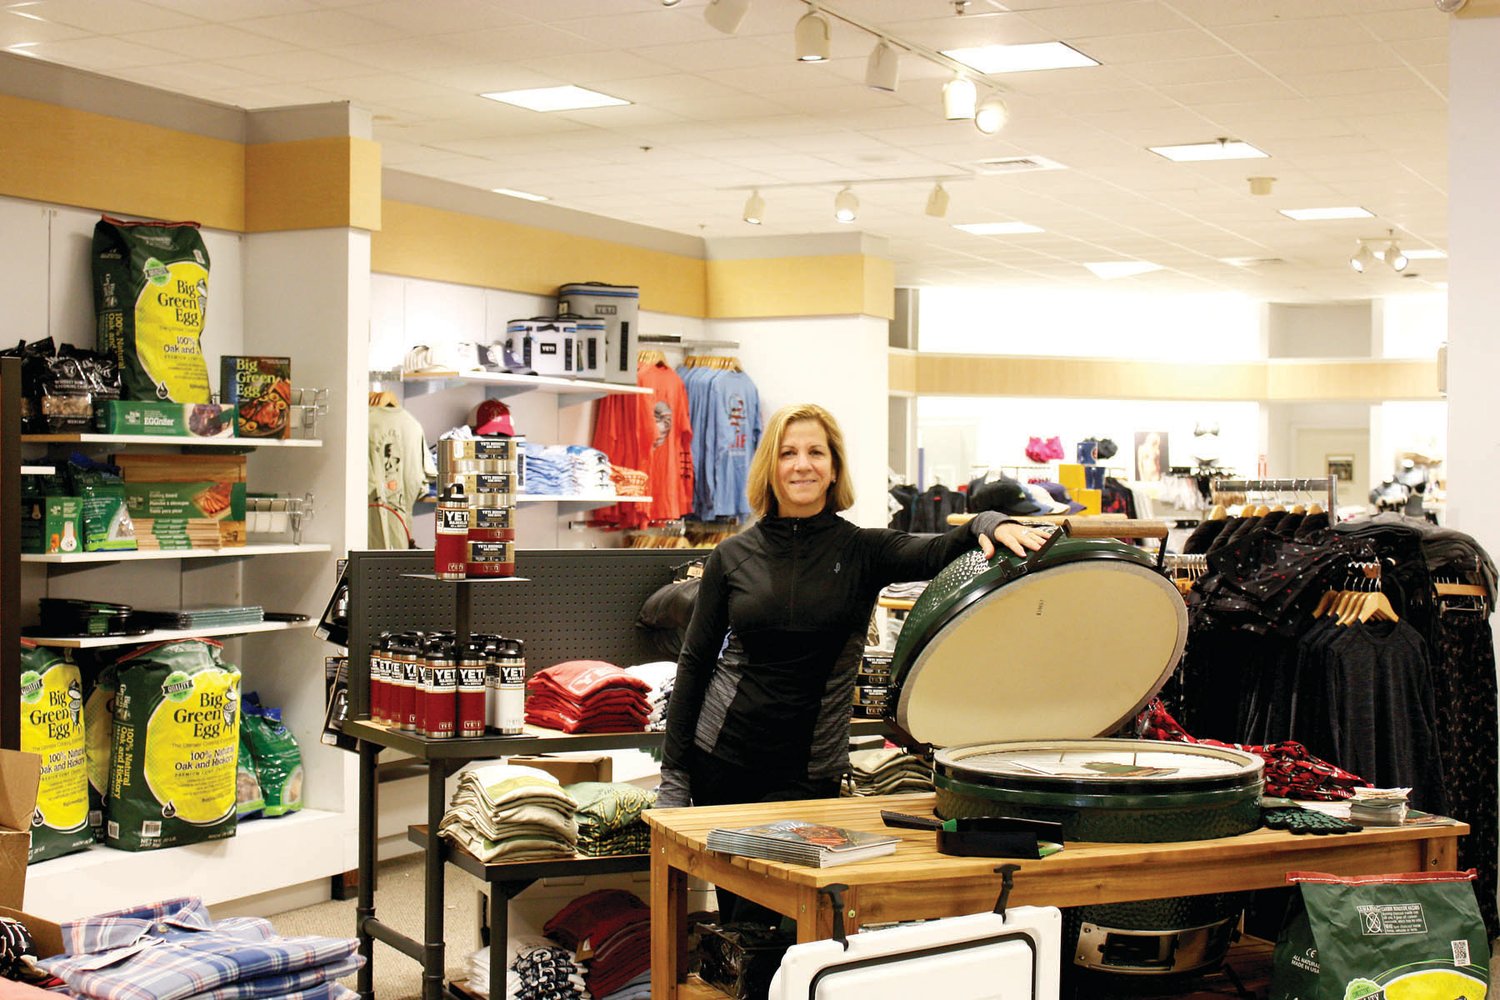 Karen Thompson, president and founder of LSL Brands, a division of Lace Silhouettes Lingerie, inside the new Fox & Holly Bucks County in the Doylestown Shopping Center just days before opening. Photograph by Jodi Spiegel Arthur